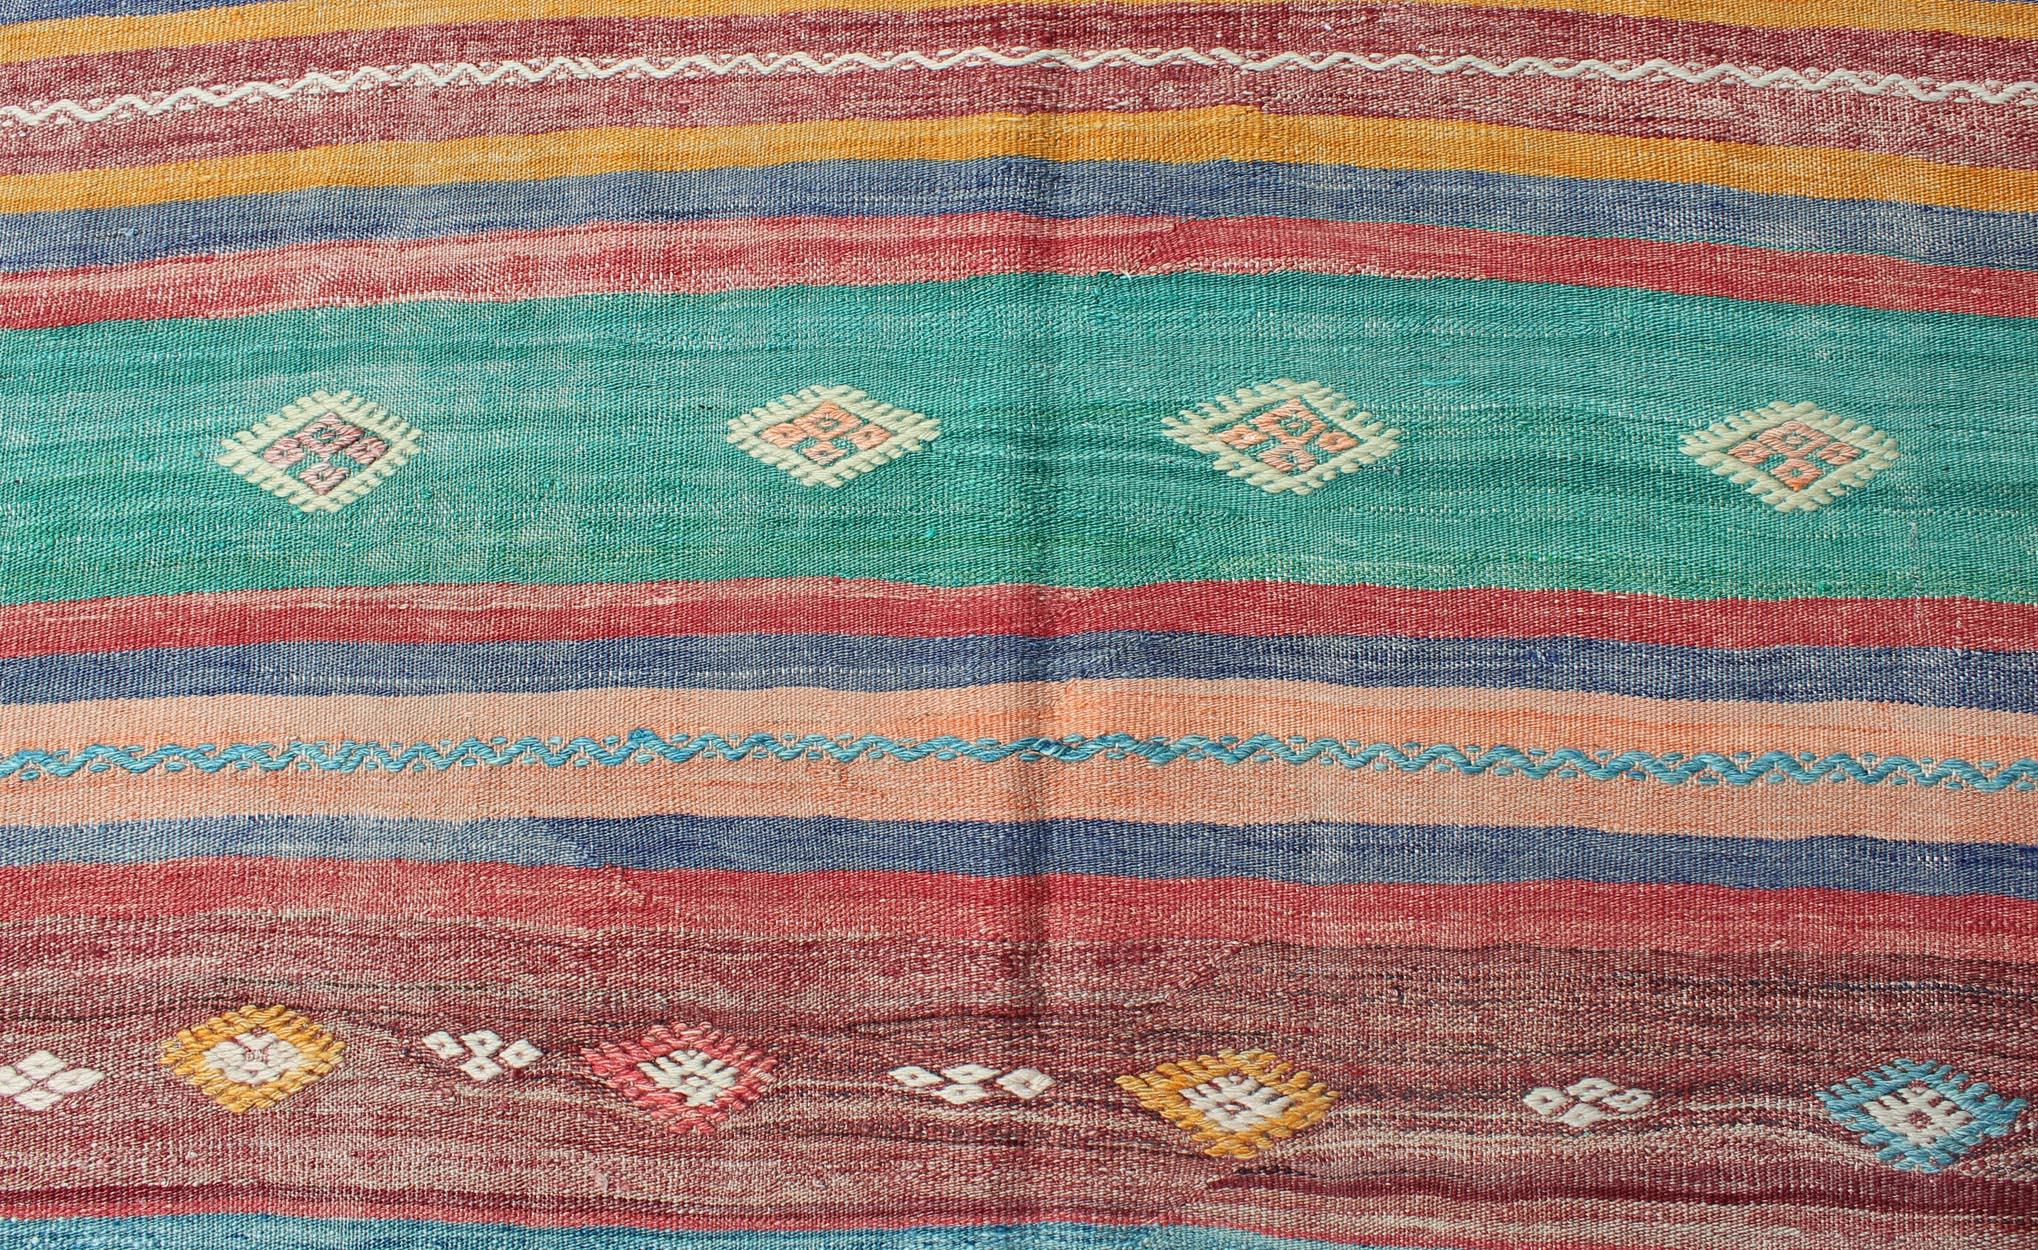 Mid-20th Century Bright and Colorful Flat-Weave Turkish Kilim Rug with Geometric Stripe Design For Sale